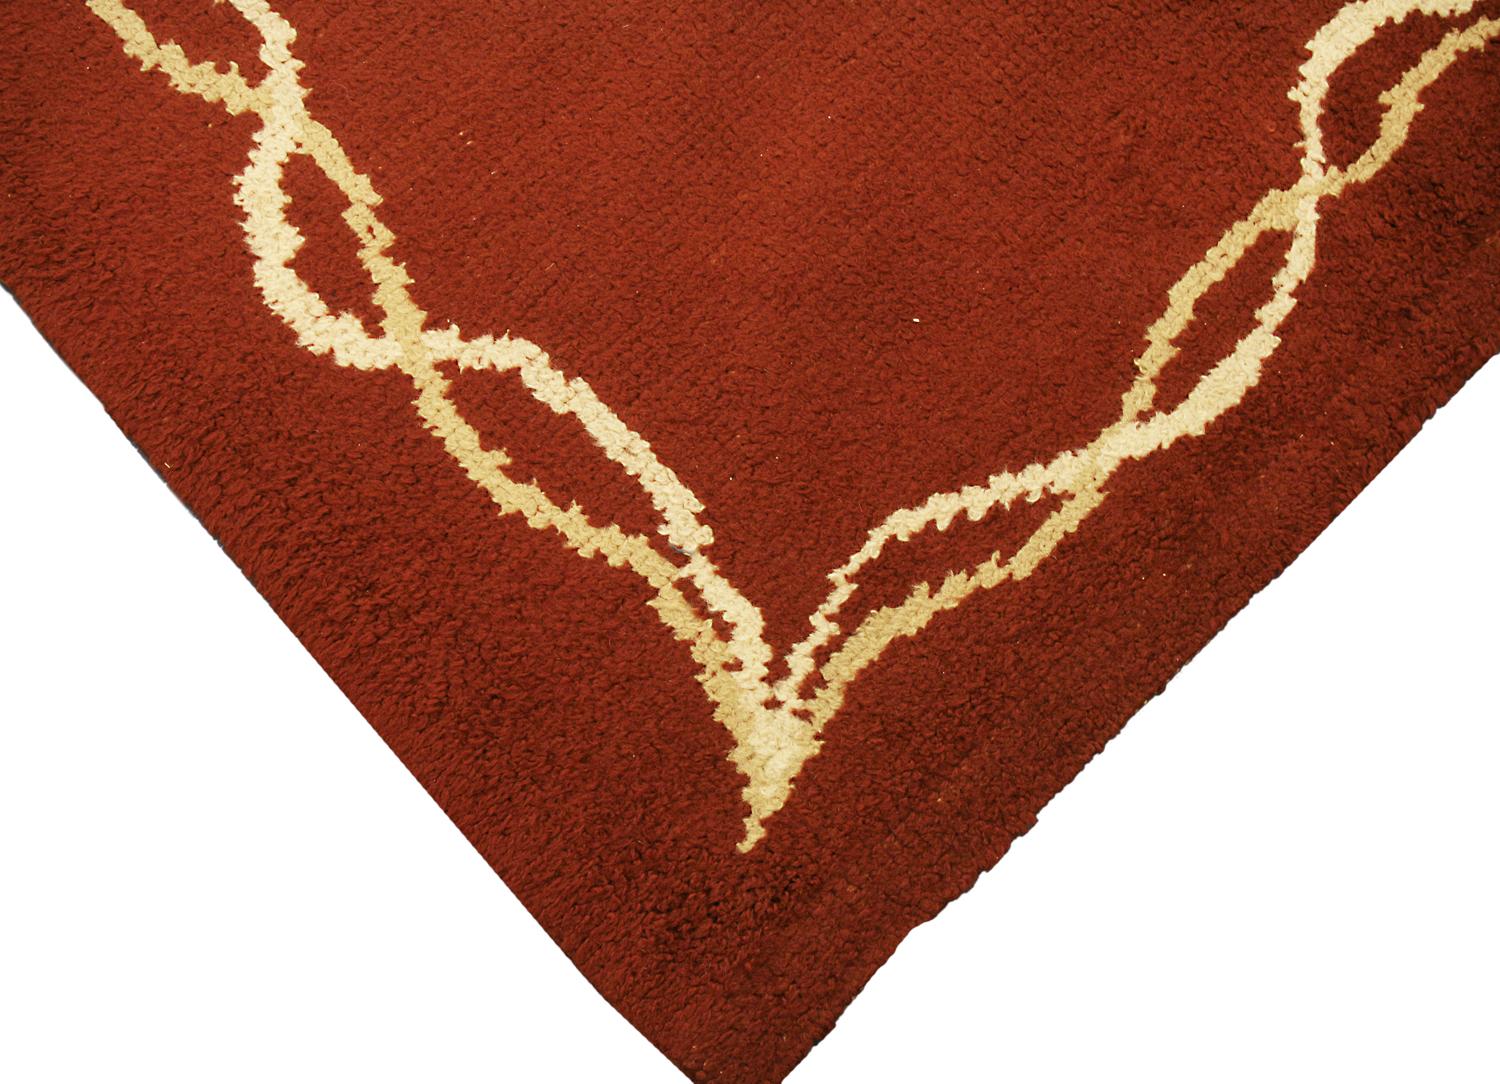 Hand-Knotted European Carpet Minimalist Design Brown Color, ca. 1950 For Sale